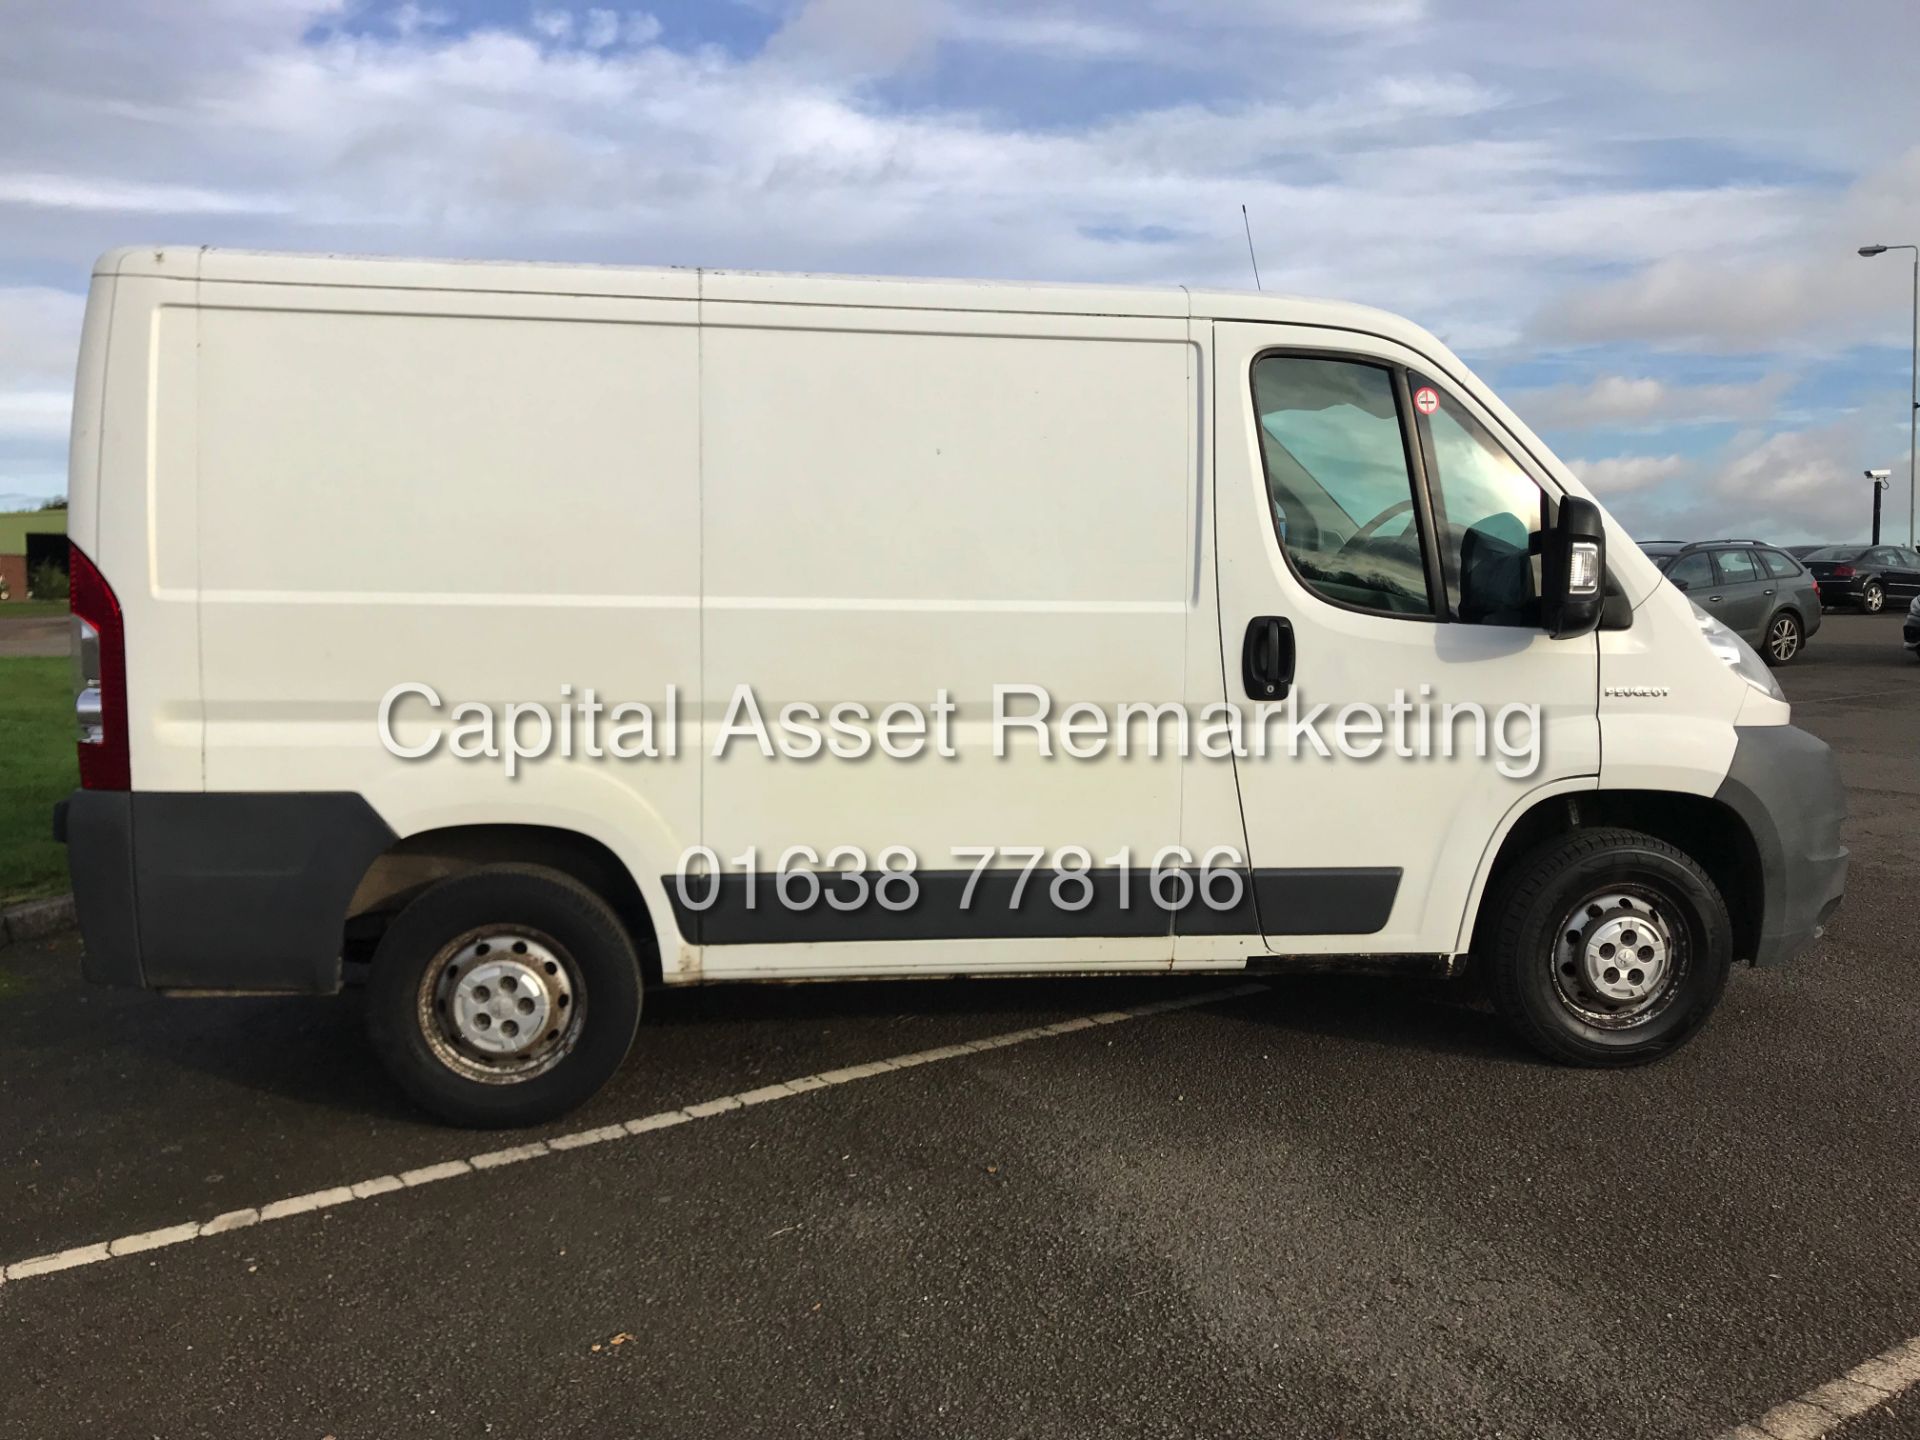 On Sale PEUGEOT BOXER 2.2HDI 330 "120BHP" (2007) 1 OWNER - LOW MILEAGE - LONG MOT - Image 6 of 12